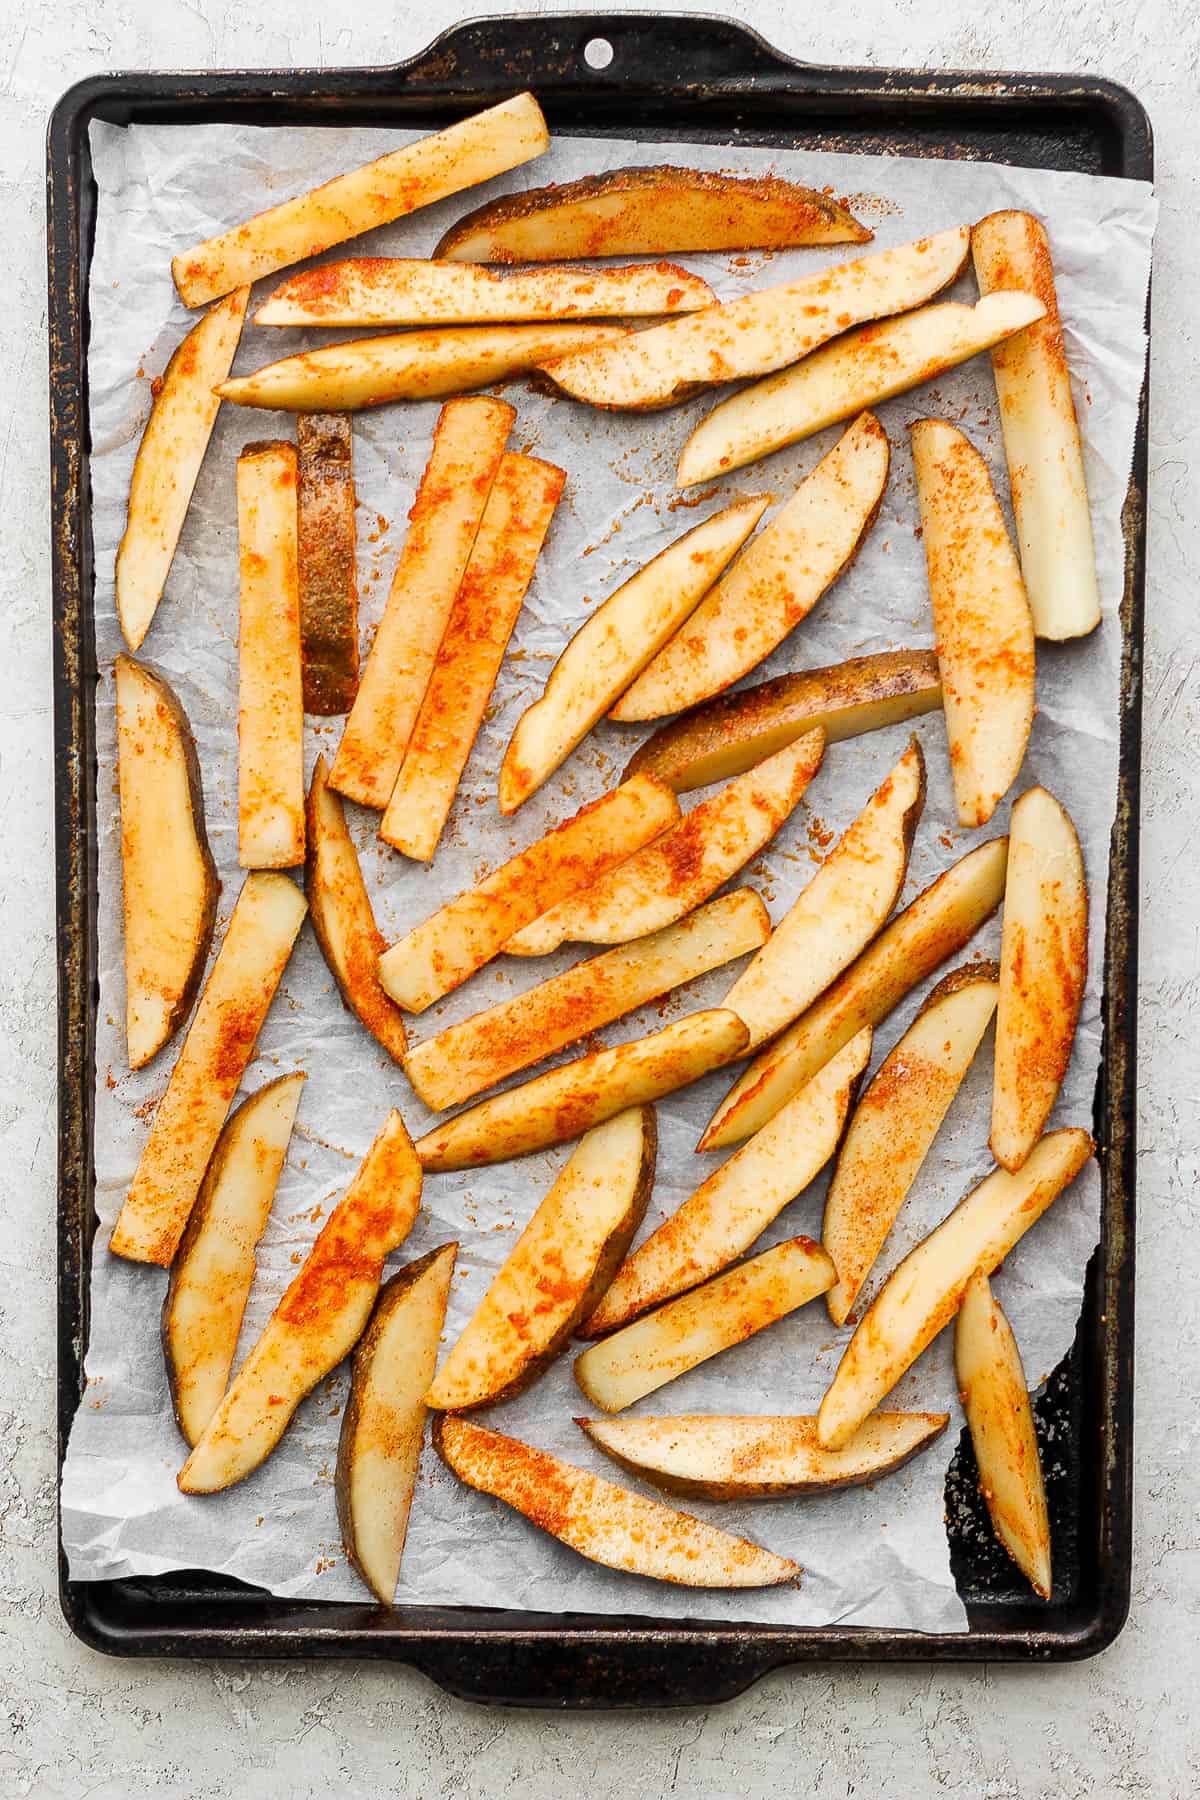 Potato fries sliced, seasoned, and placed on a large baking sheet lined with parchment paper. 